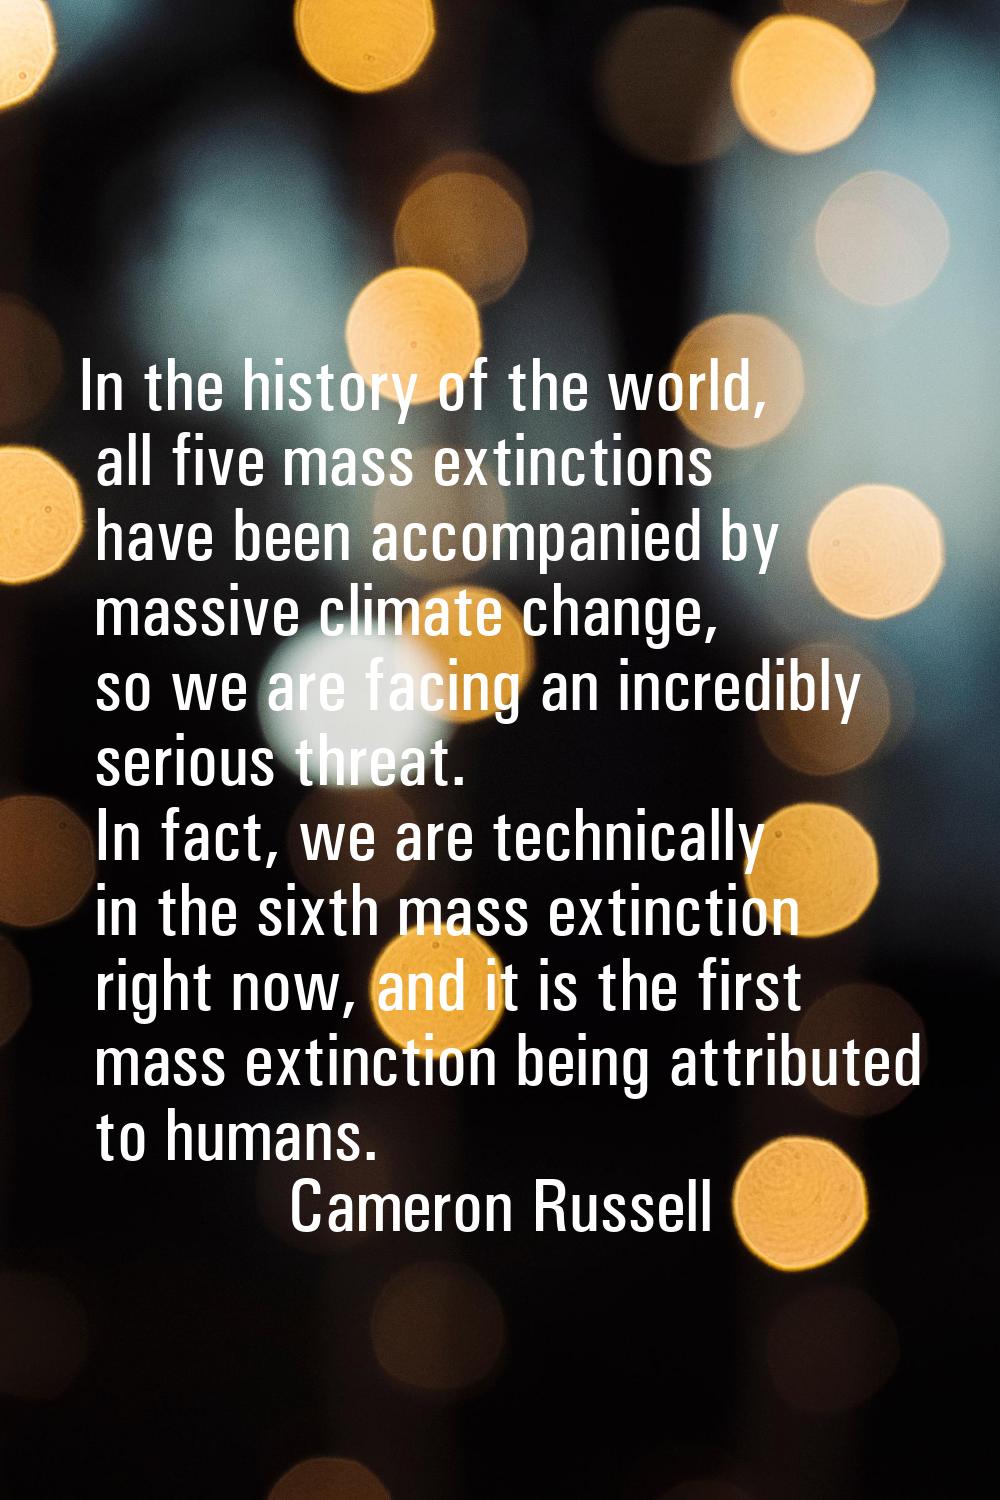 In the history of the world, all five mass extinctions have been accompanied by massive climate cha